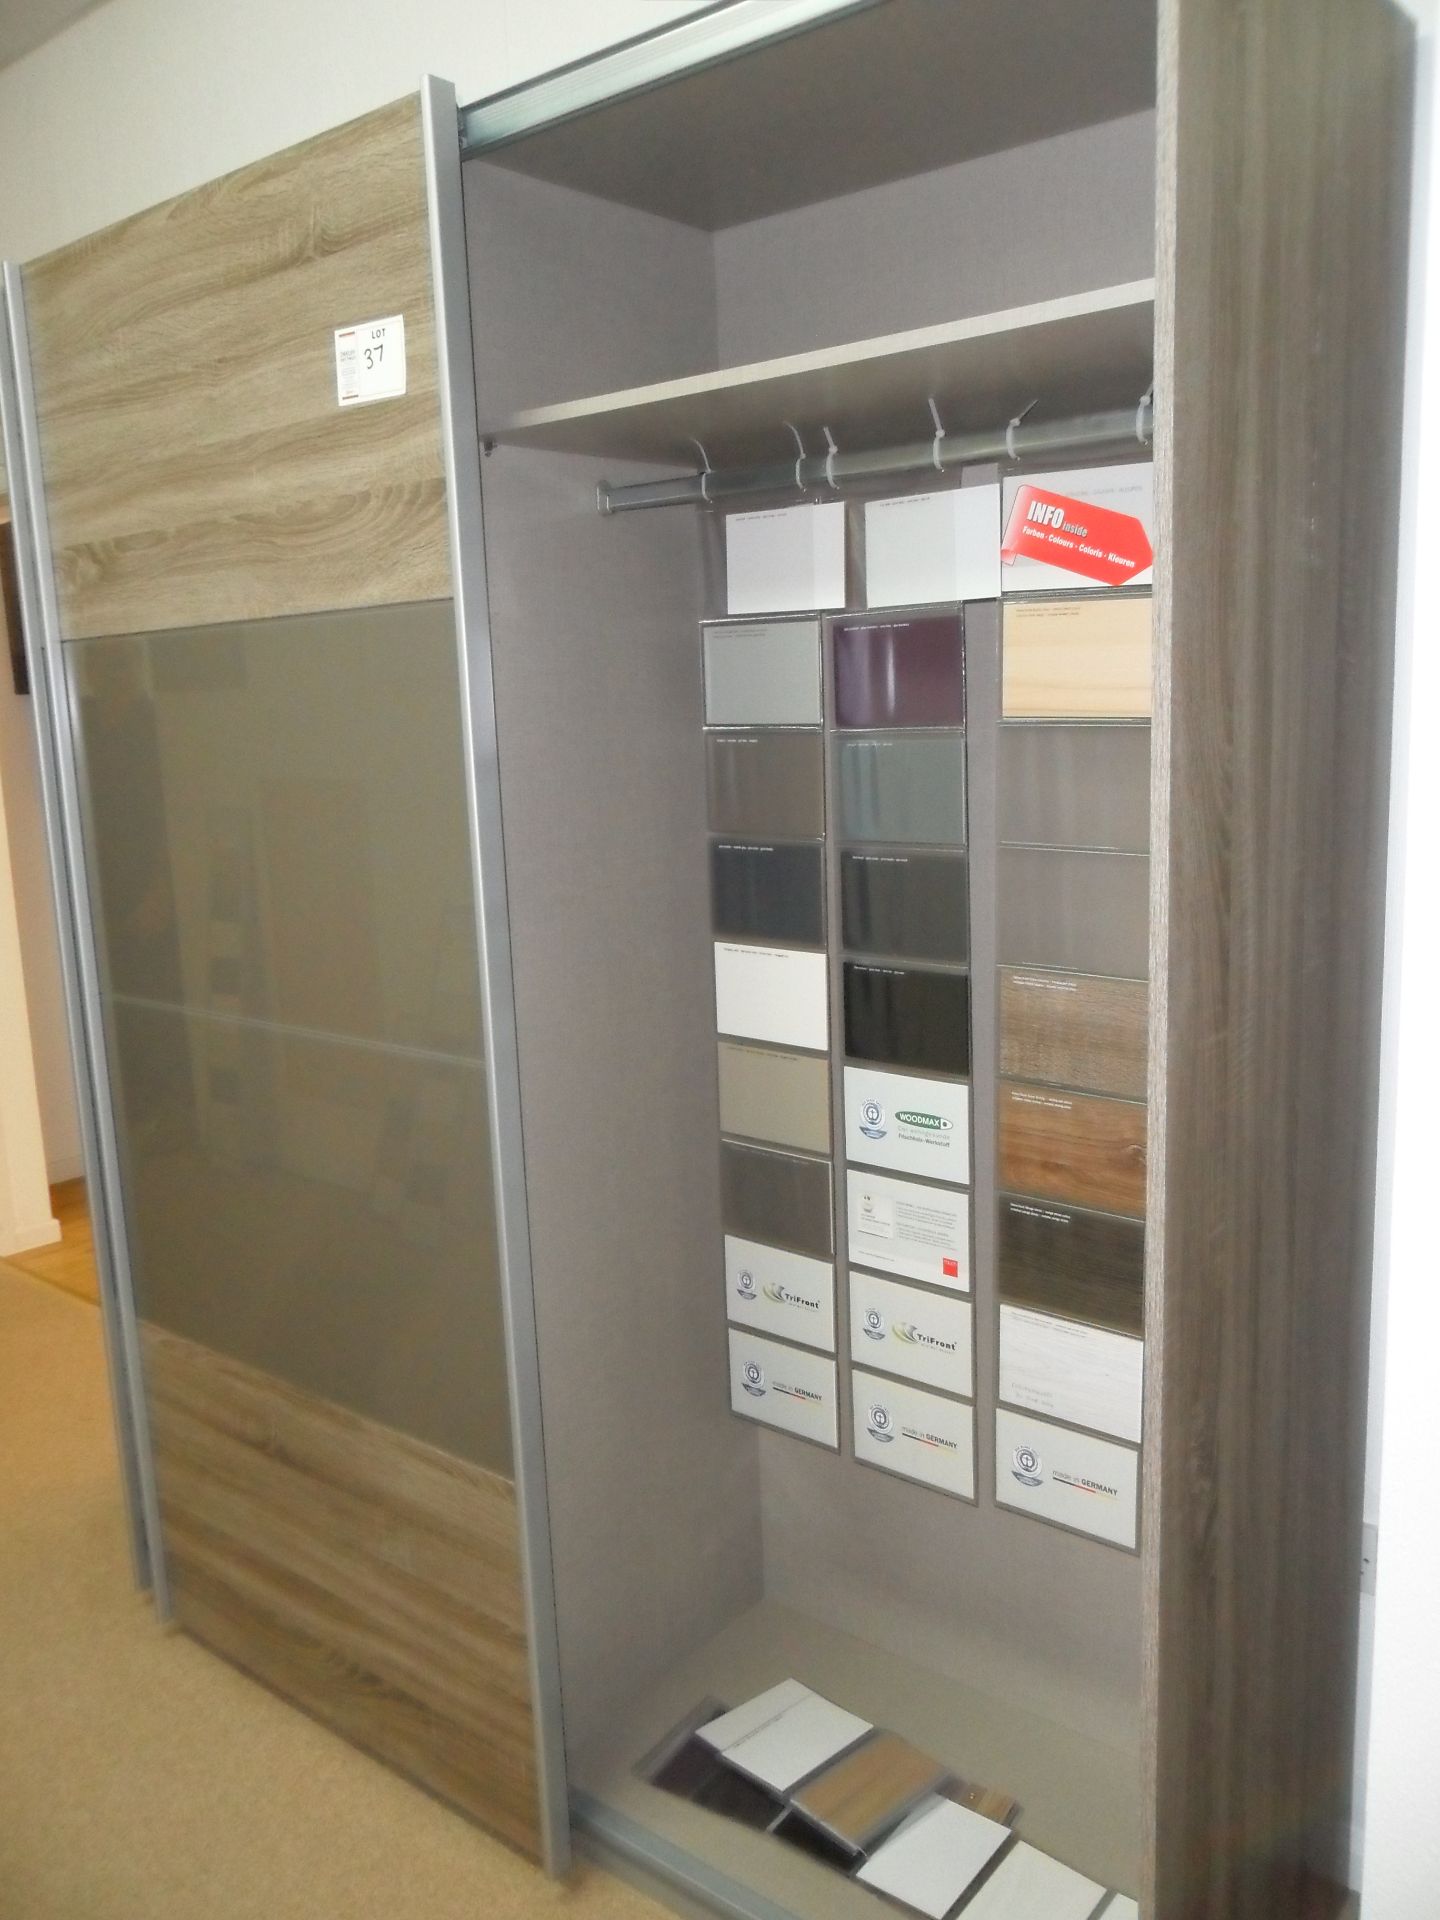 Woodmax glass and wood DOUOBLE SLIDING DOOR WARDROBE, 1800mm wide x 2100mm tall - Image 2 of 2